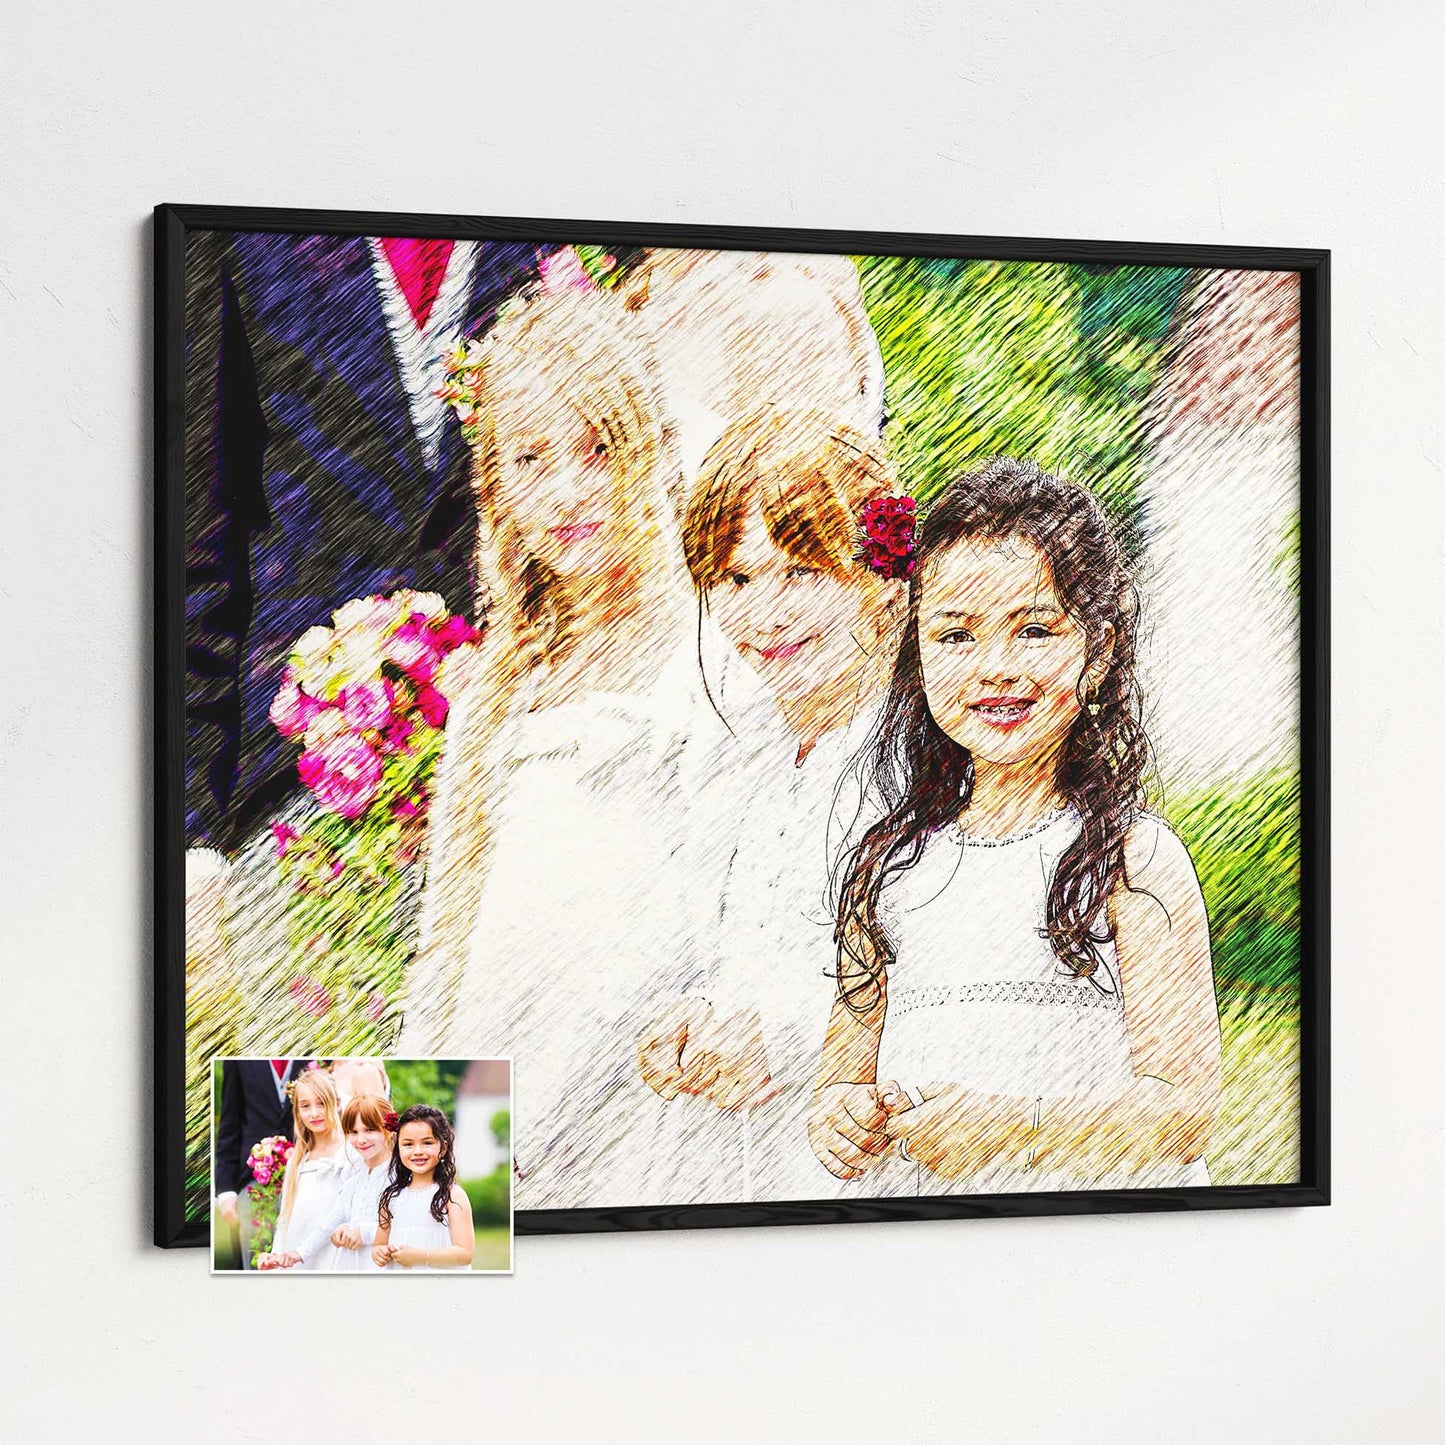 Transform your space with our Personalised Artsy Illustration Framed Print. Crafted from a photo, this stunning artwork is printed on museum-quality paper, ensuring exceptional clarity and detail, natural wood frame 